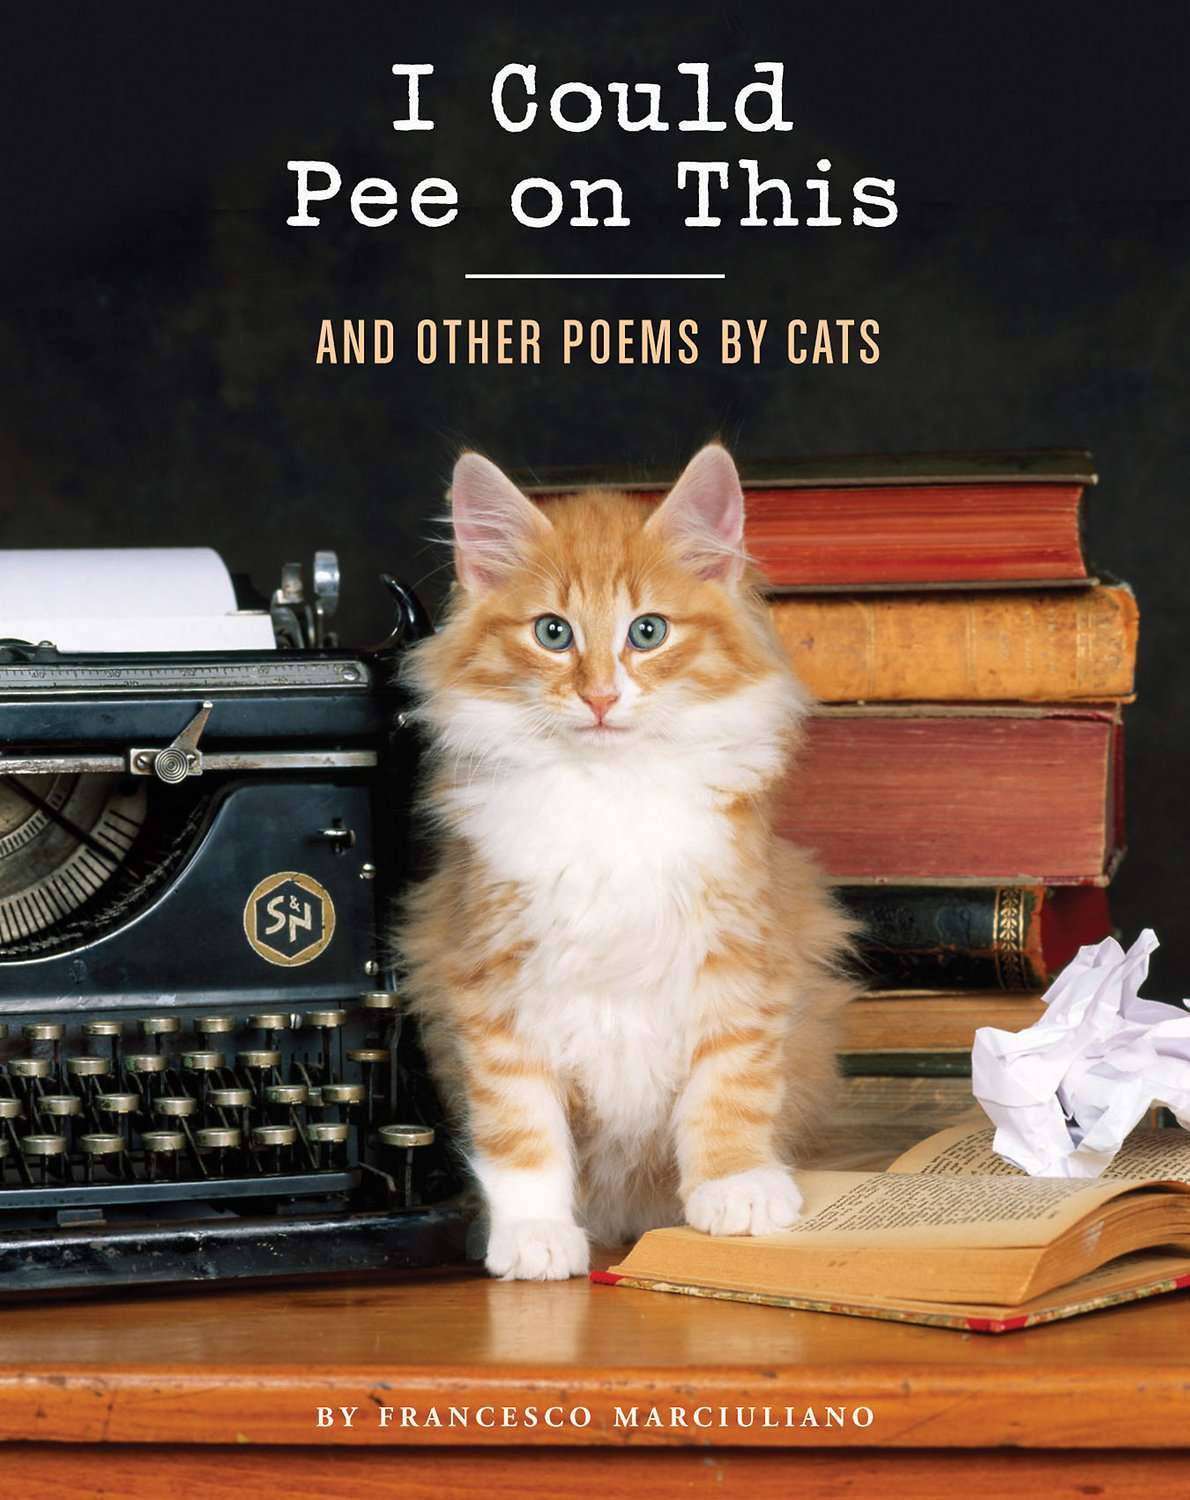 Cover of book with cat on front